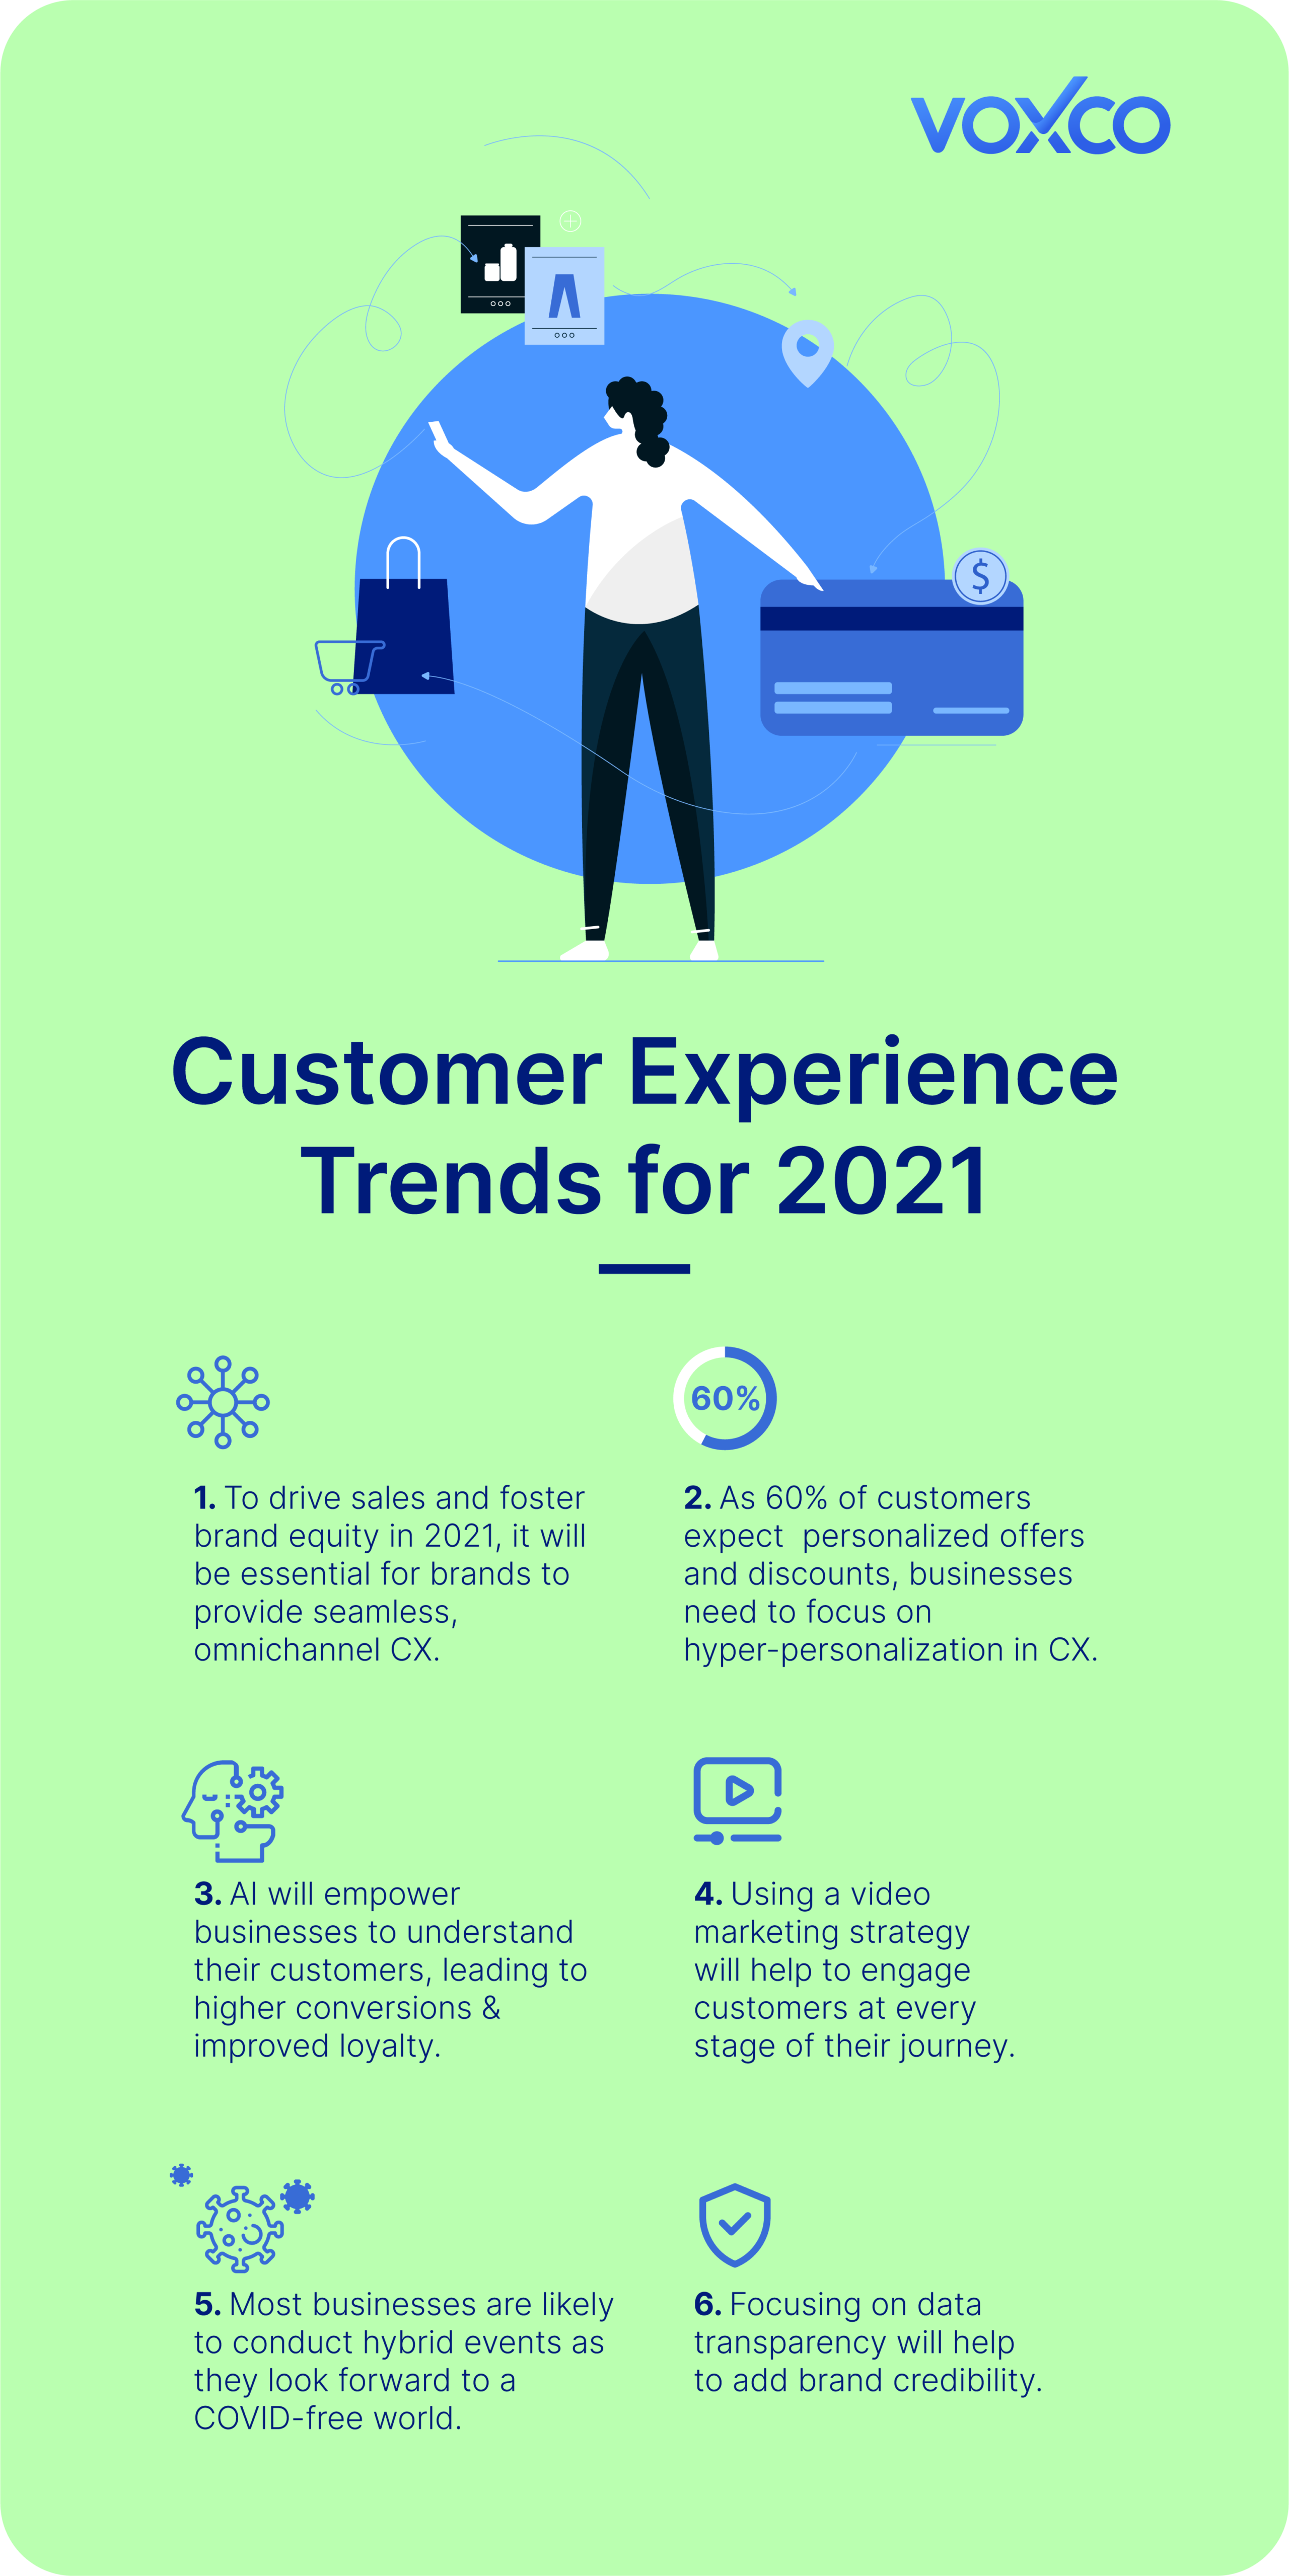 Customer Experience Trends to Watch out For in 2021 05